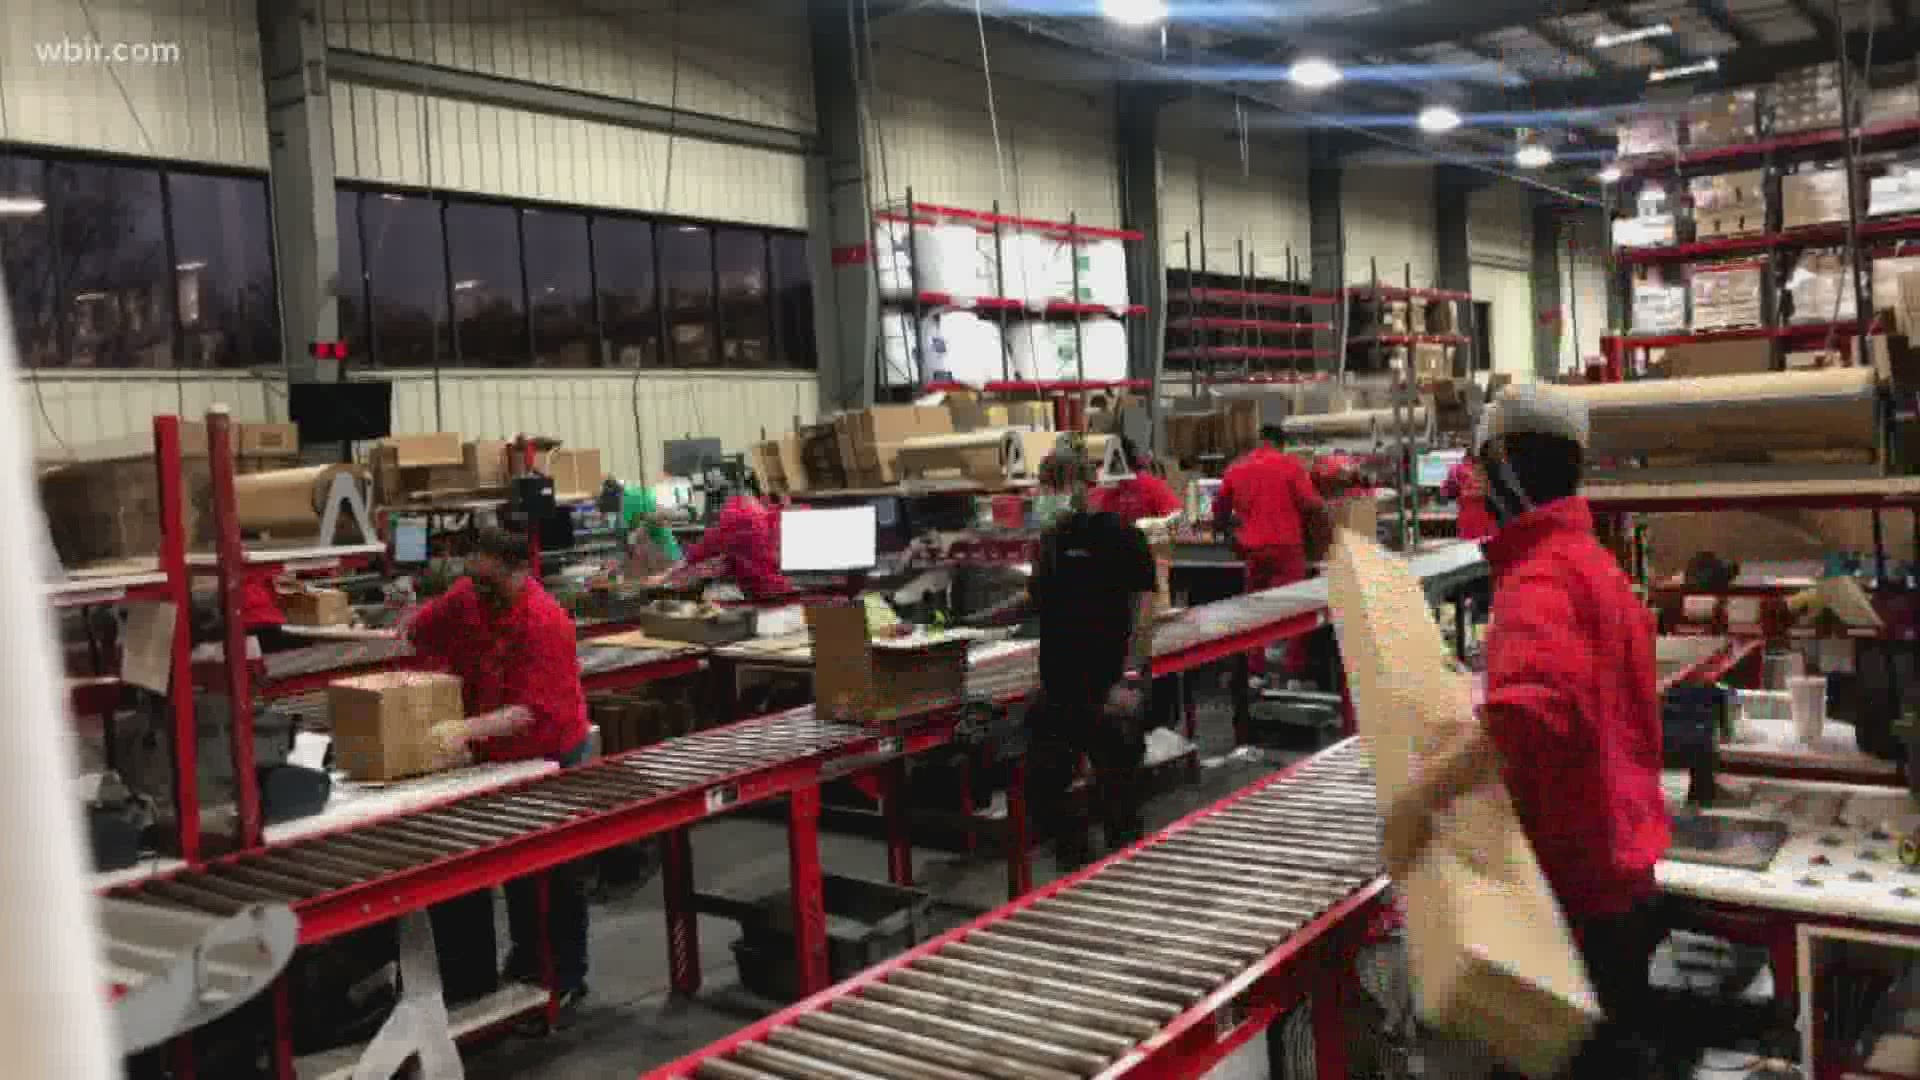 A look inside the Red Stag fulfillment center on Cyber Monday. Nov. 30, 2020-4pm